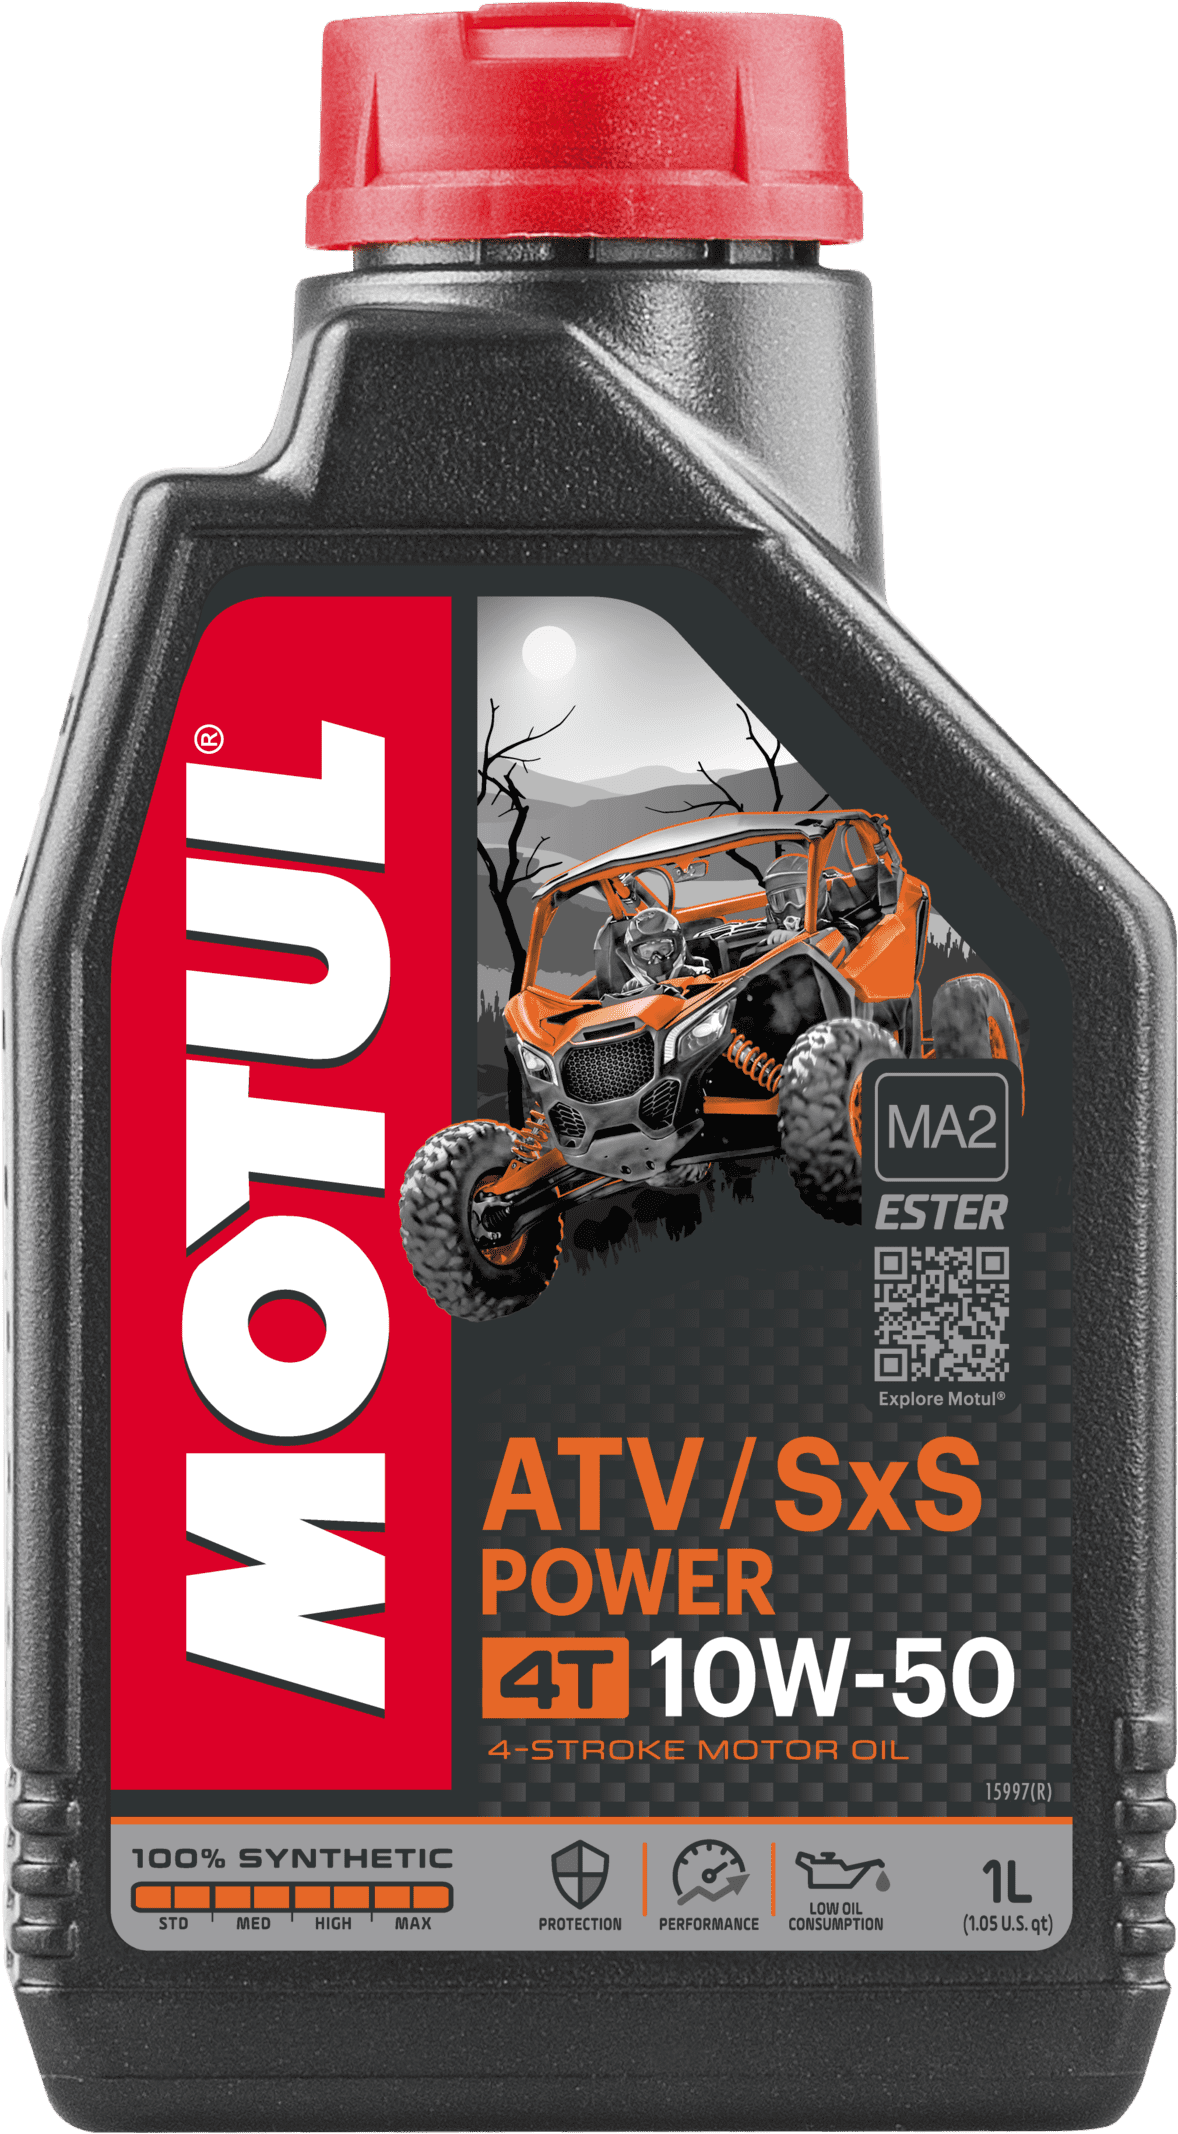 105900-1 100% Synthetic - Ester lubricant developed for the latest performance Side-by-Side (SxS) & ATV vehicles.